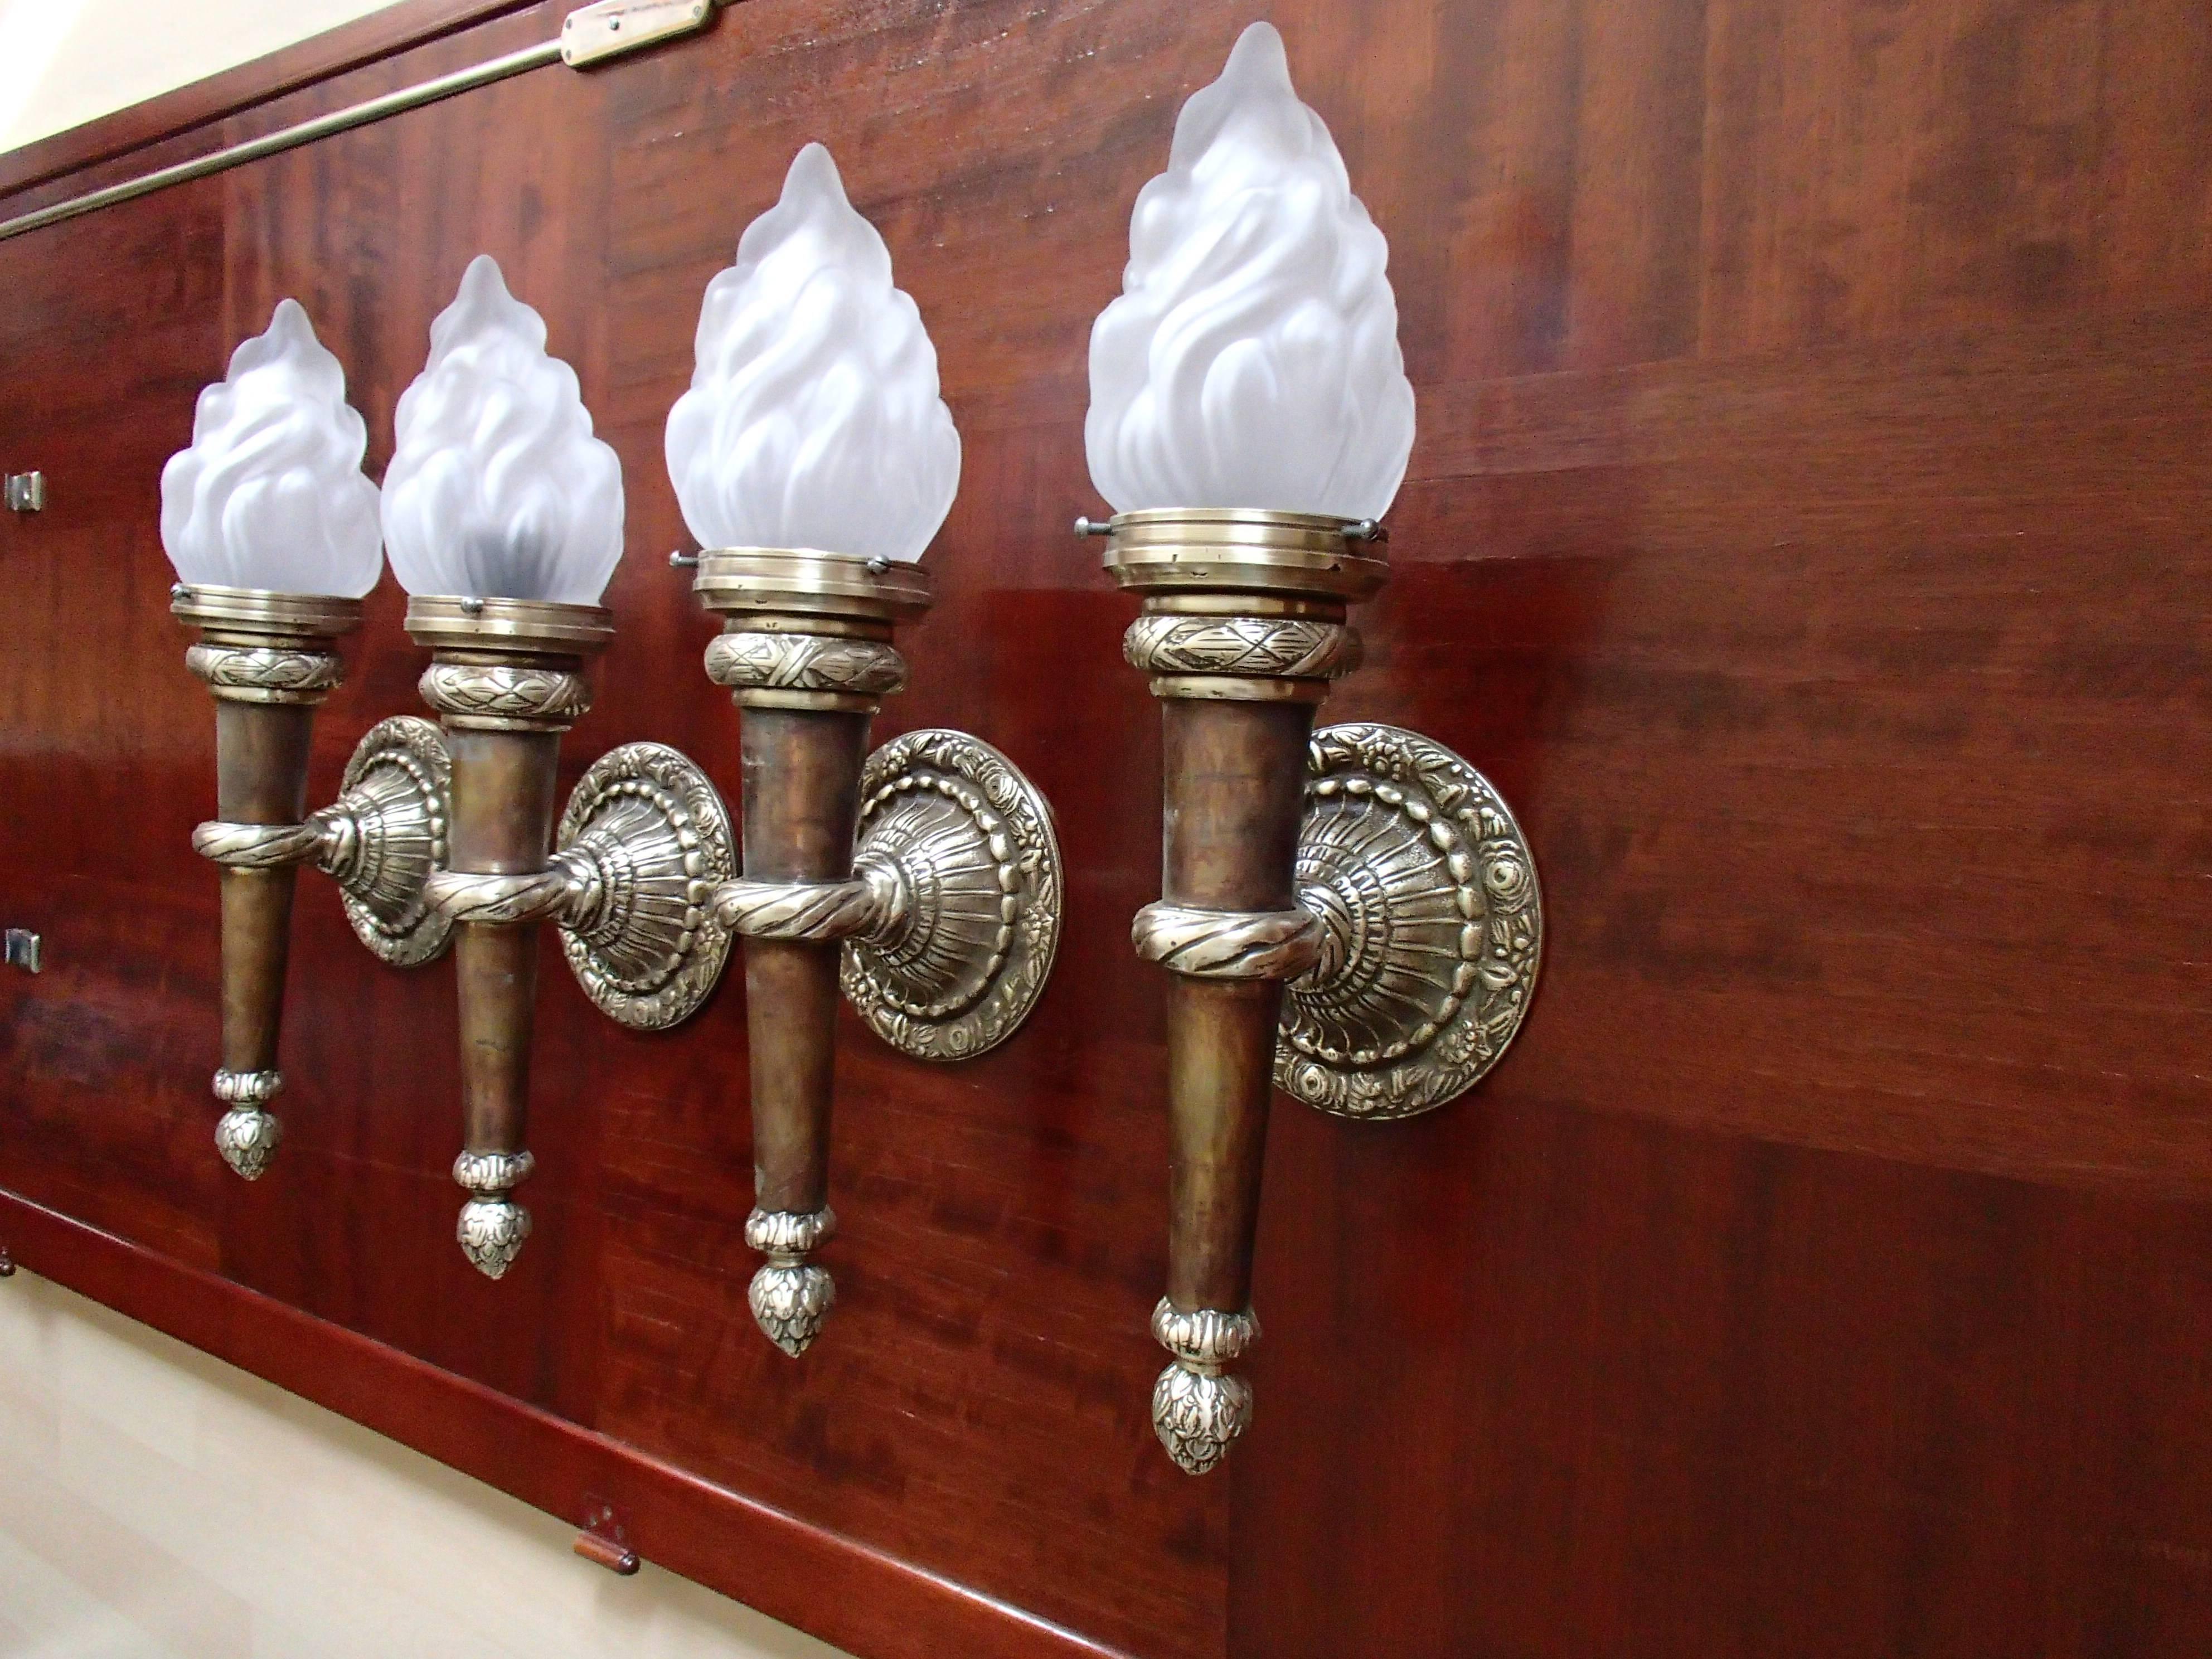 Four huge walllights torches with flame glass.